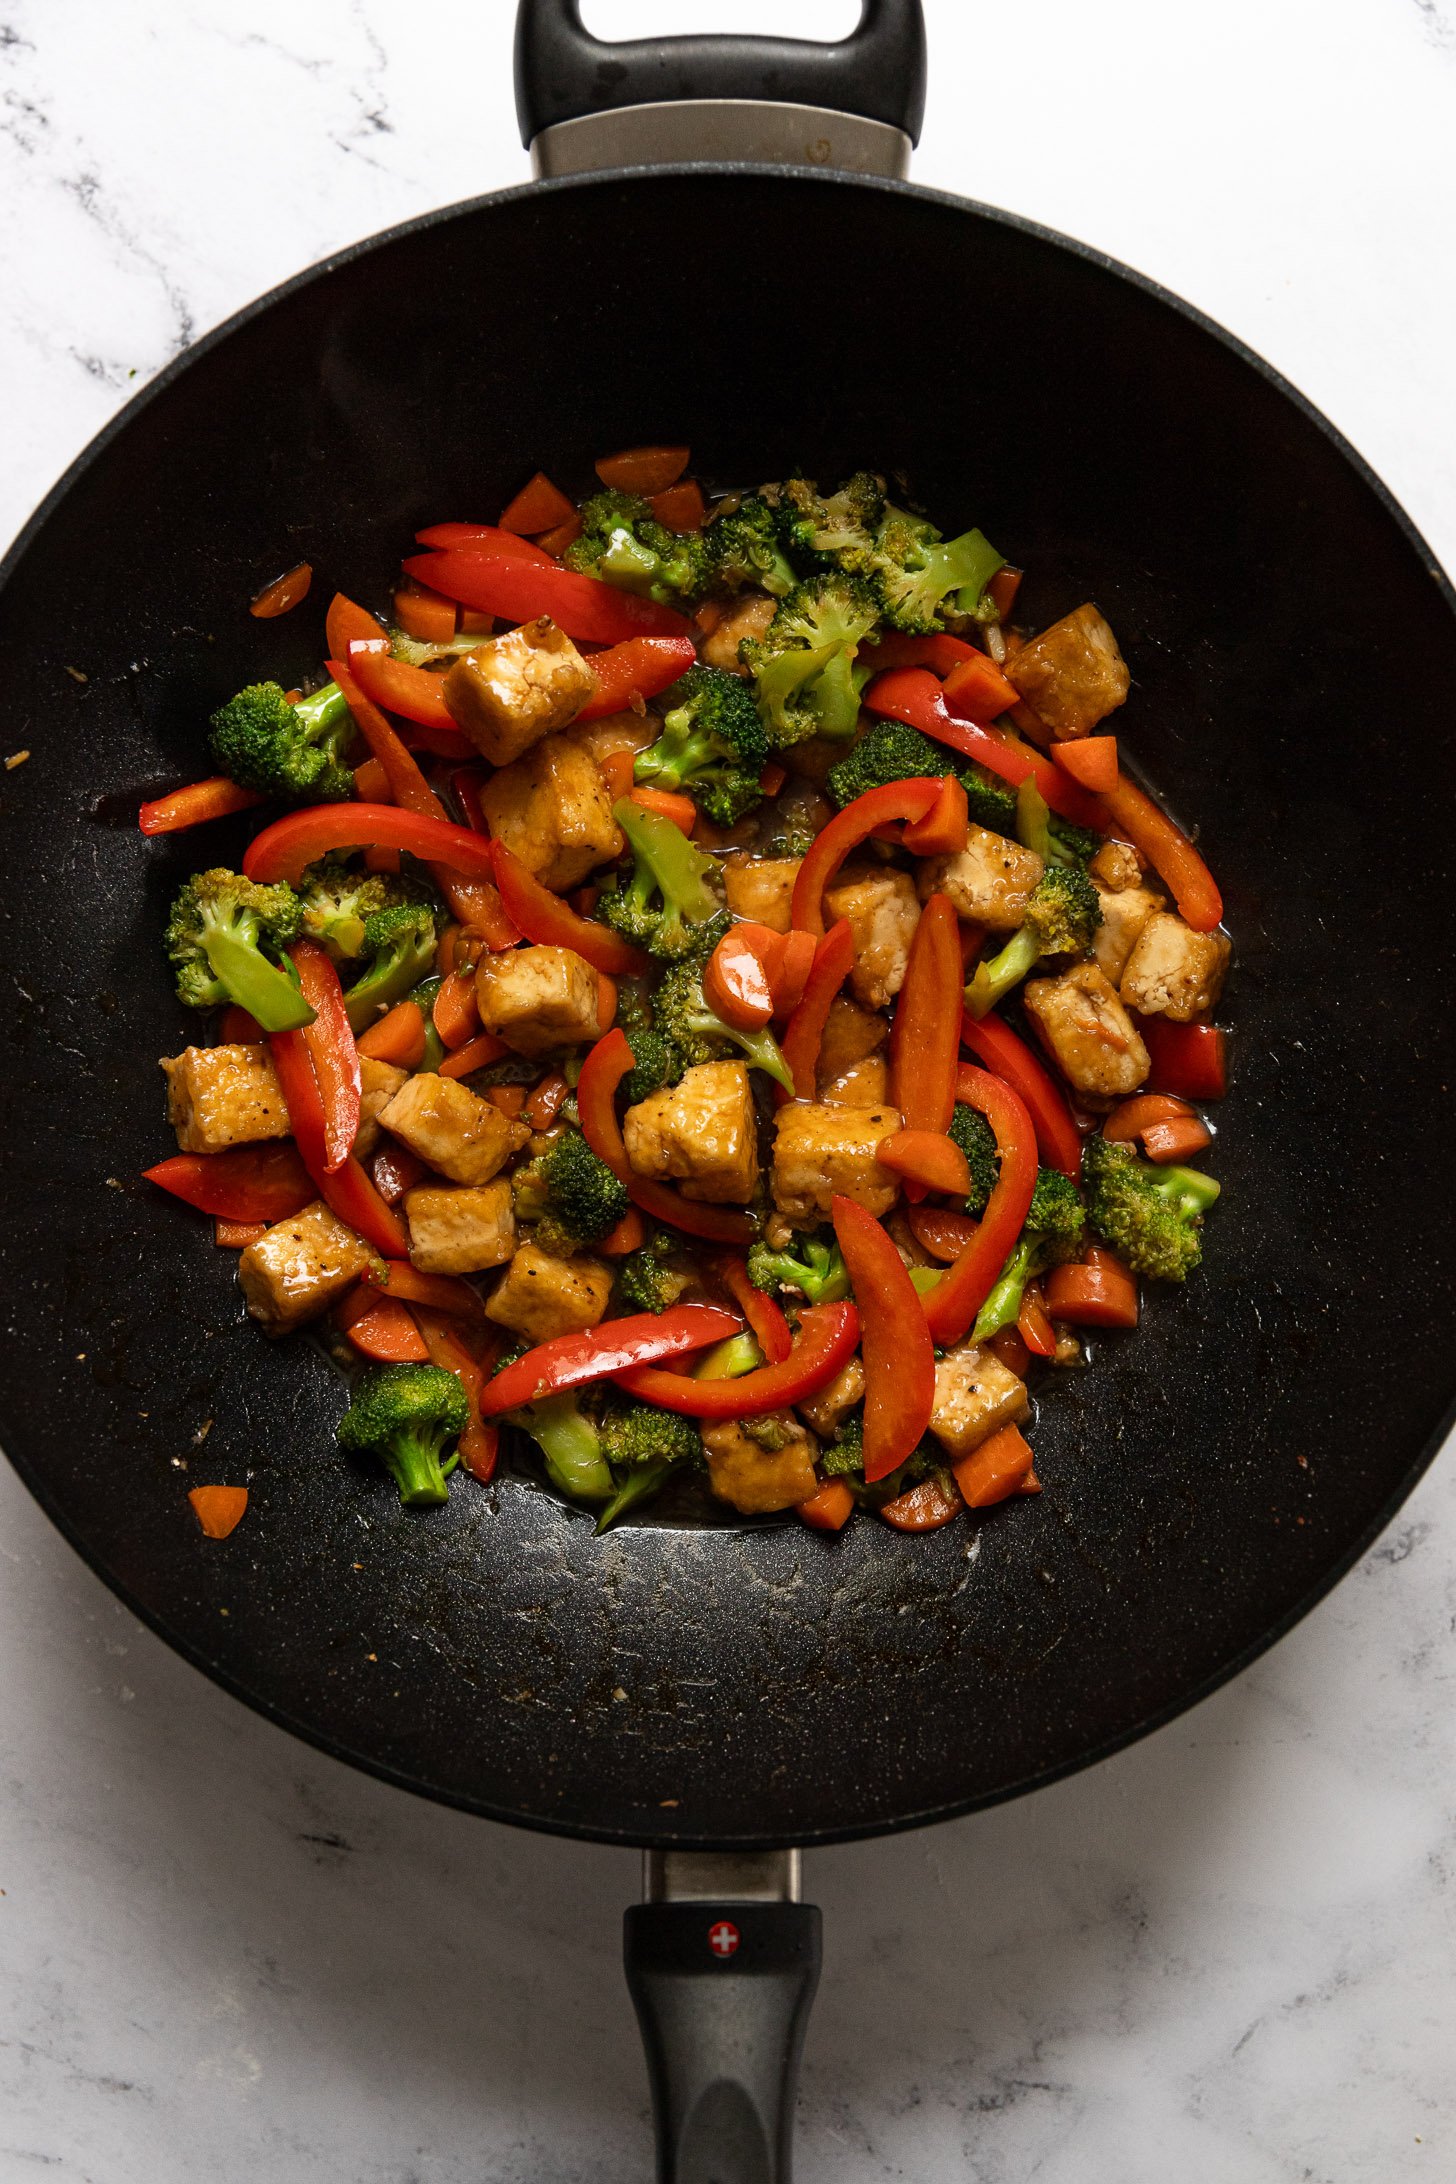 Tofu and sauce into wok with vegetables.